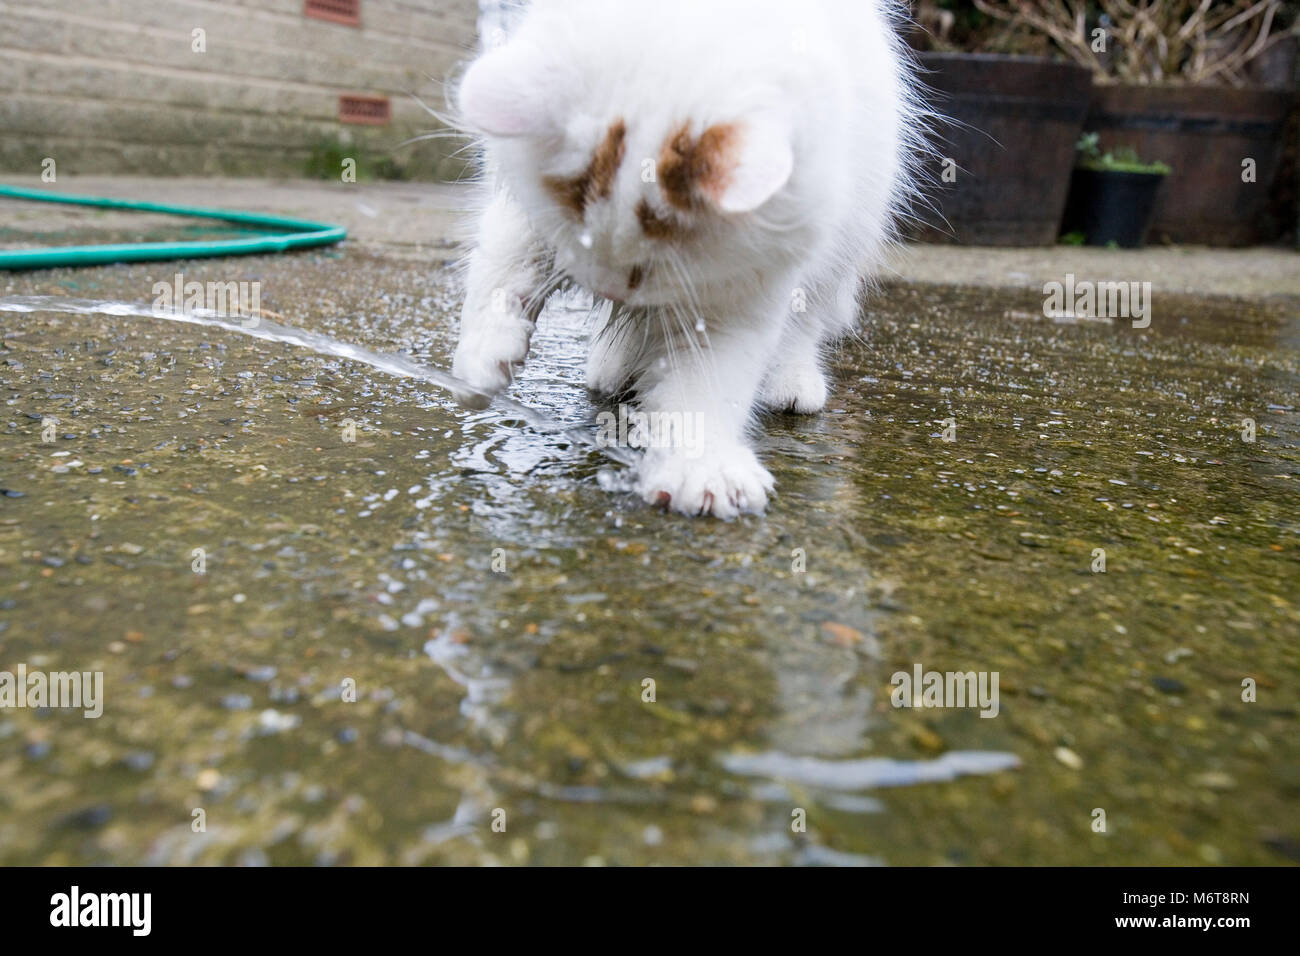 Turkish van white fluffy cat playing with water Stock Photo - Alamy